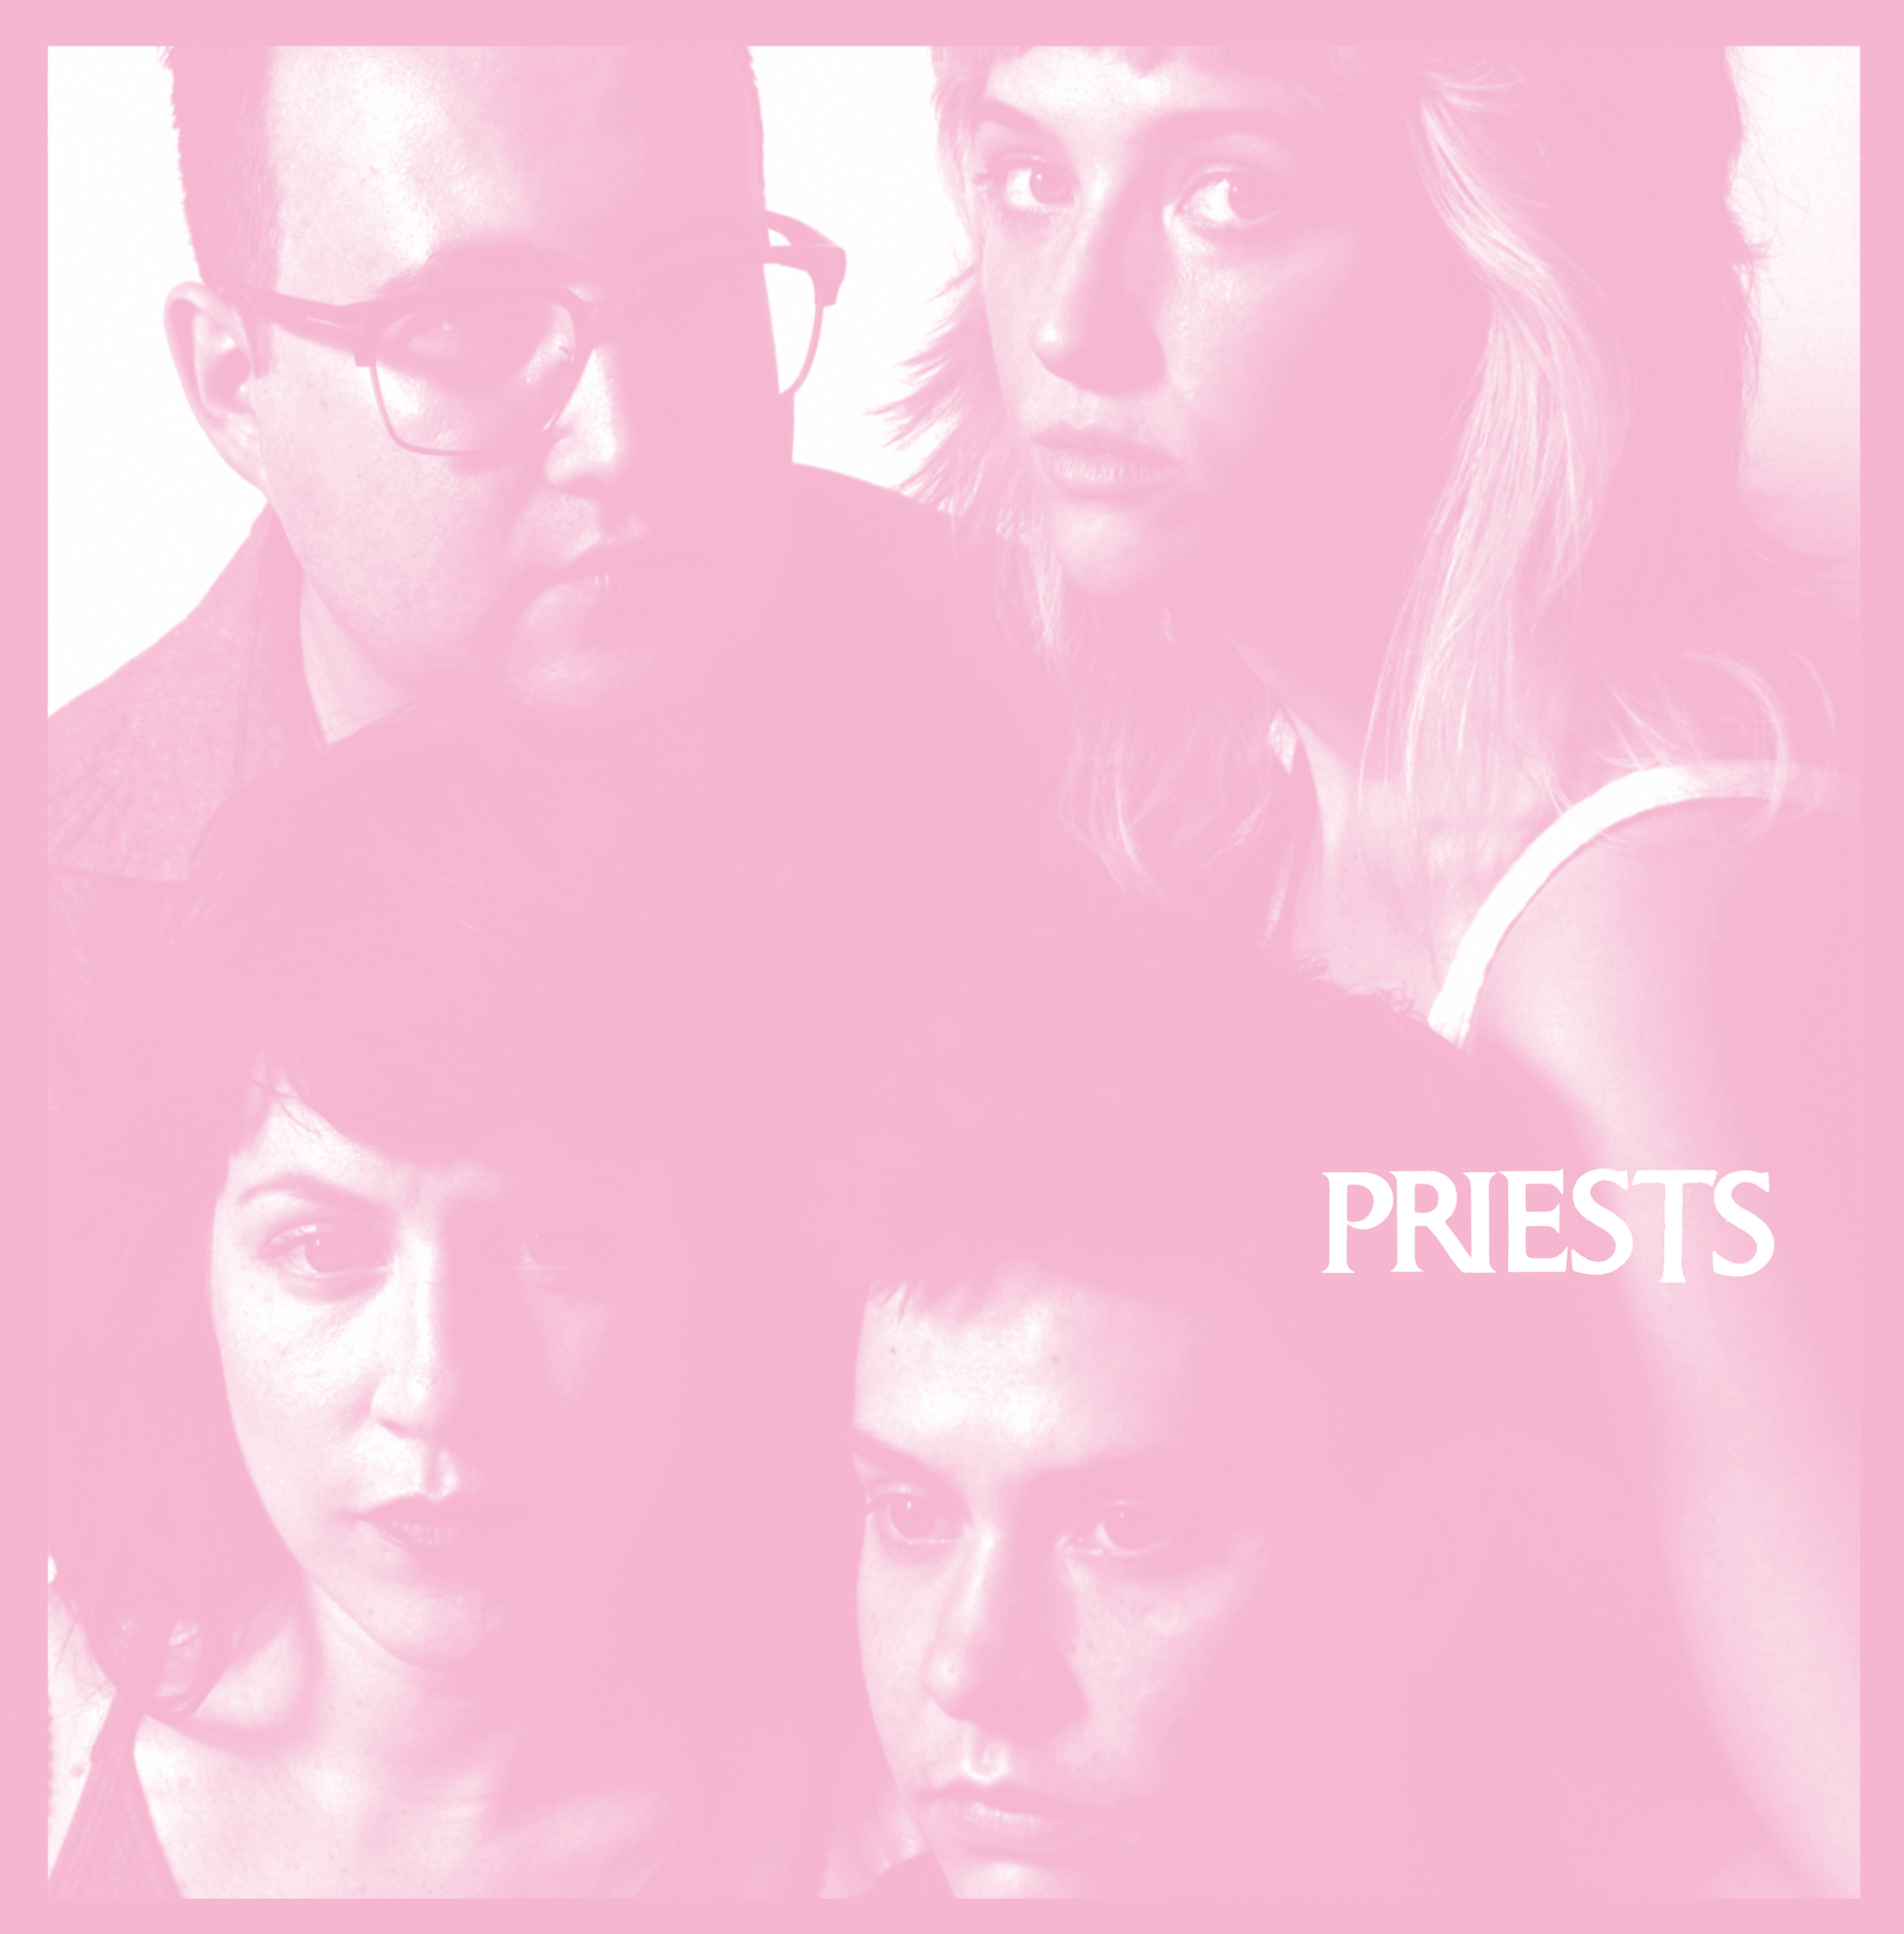 Priests Announce Debut Full-Length <em></noscript>Nothing Feels Natural</em>, Share “JJ” Video” title=”PRIESTS NFN LP COVER low-res” data-original-id=”211759″ data-adjusted-id=”211759″ class=”sm_size_full_width sm_alignment_center ” />
</div>
</div>
</div>
</div>
</div>
</section>
<section data-particle_enable=